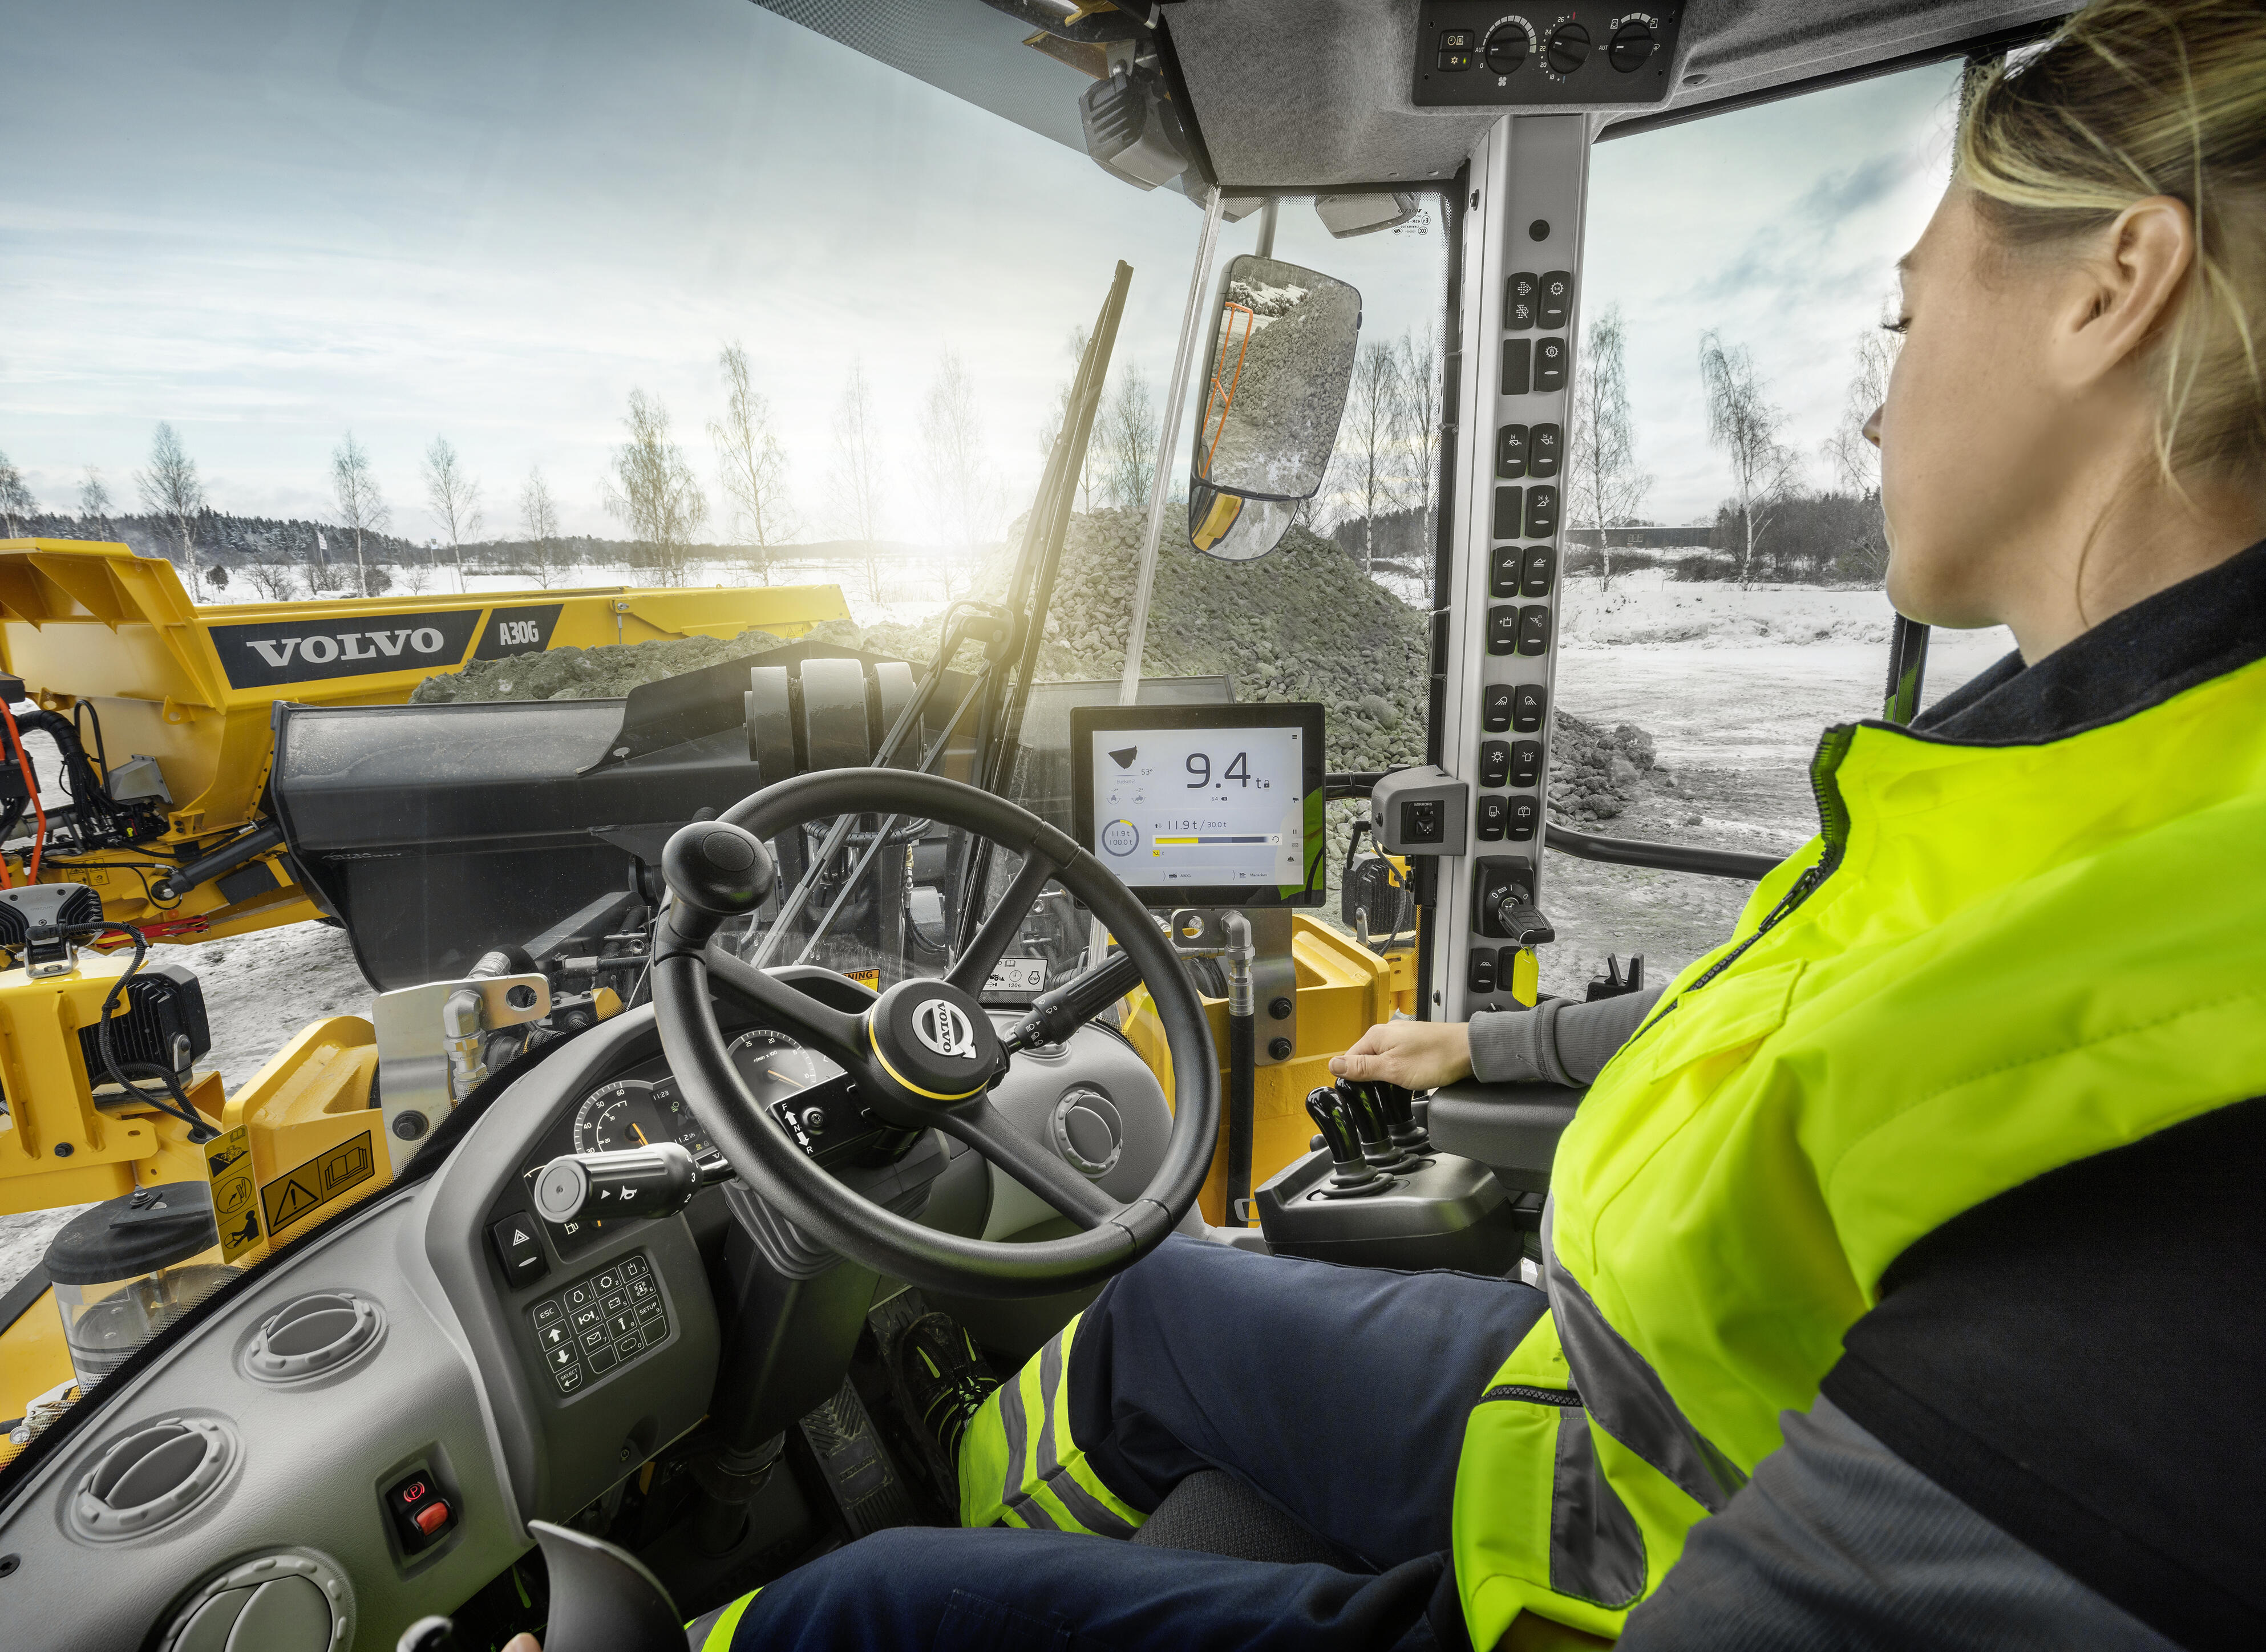 volvo-ce_news-story_the-furious-five-components-that-help-machine-control-systems-click_03